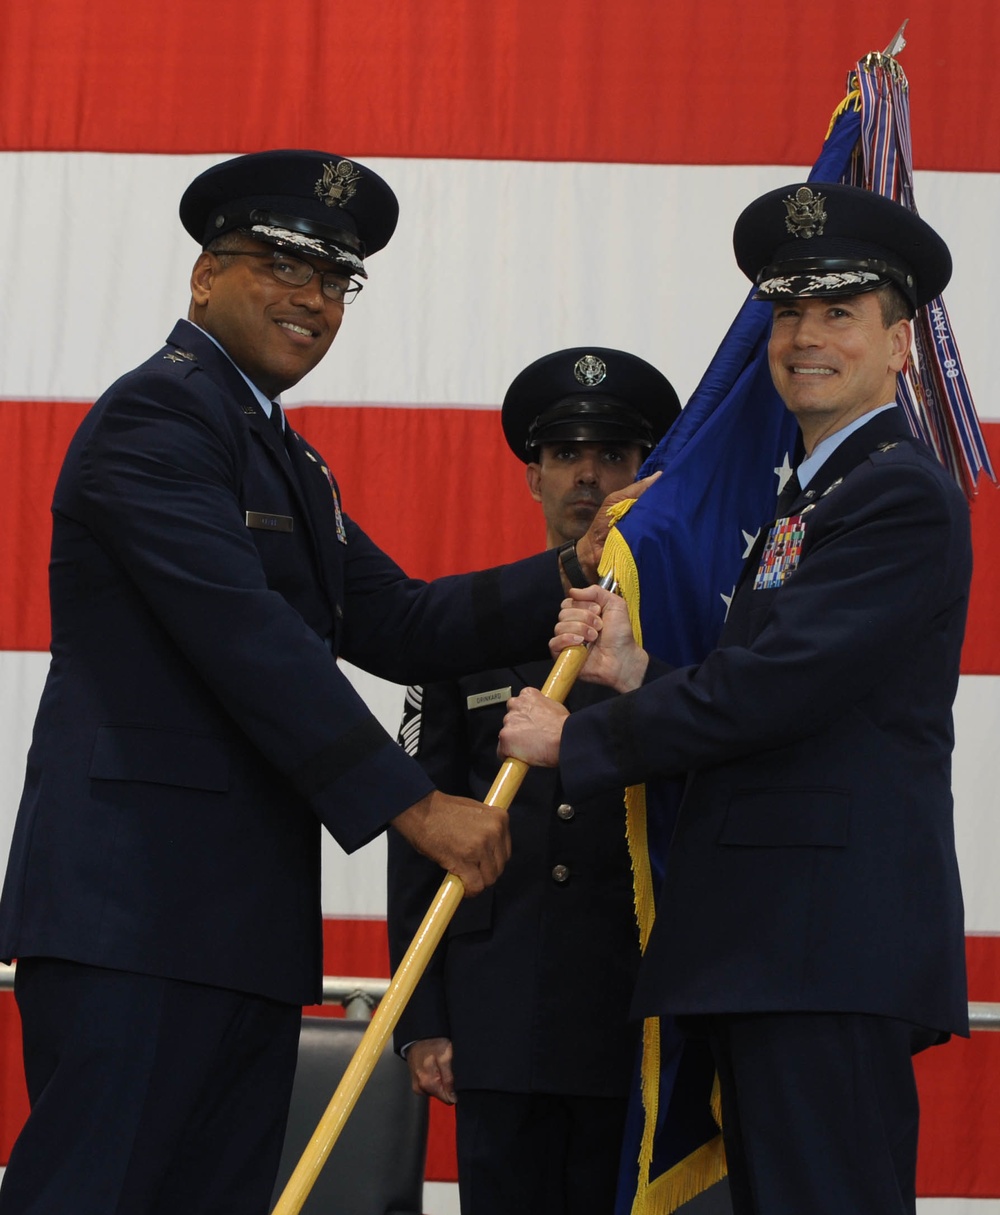 Continuing the legacy: Tibbets takes command of 509th Bomb Wing